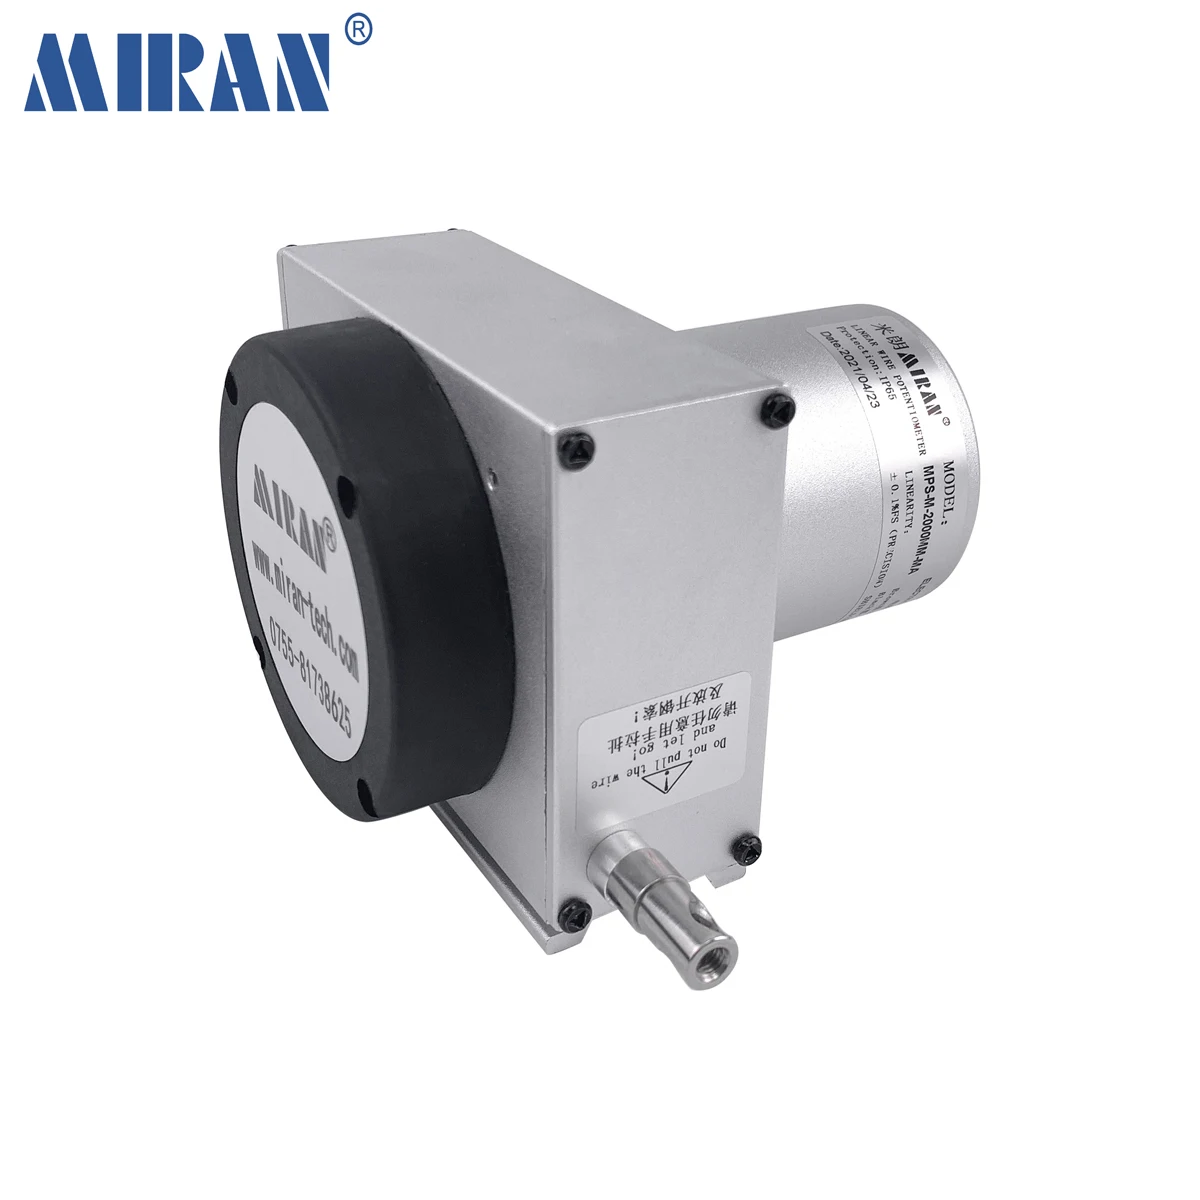 

MIRAN MPS-M-P 1500-4000mm ABZ Phase Linear Scale 2000mm Absolute Encoder Potentiometer Wire Draw Encoder Linear Position Sensor